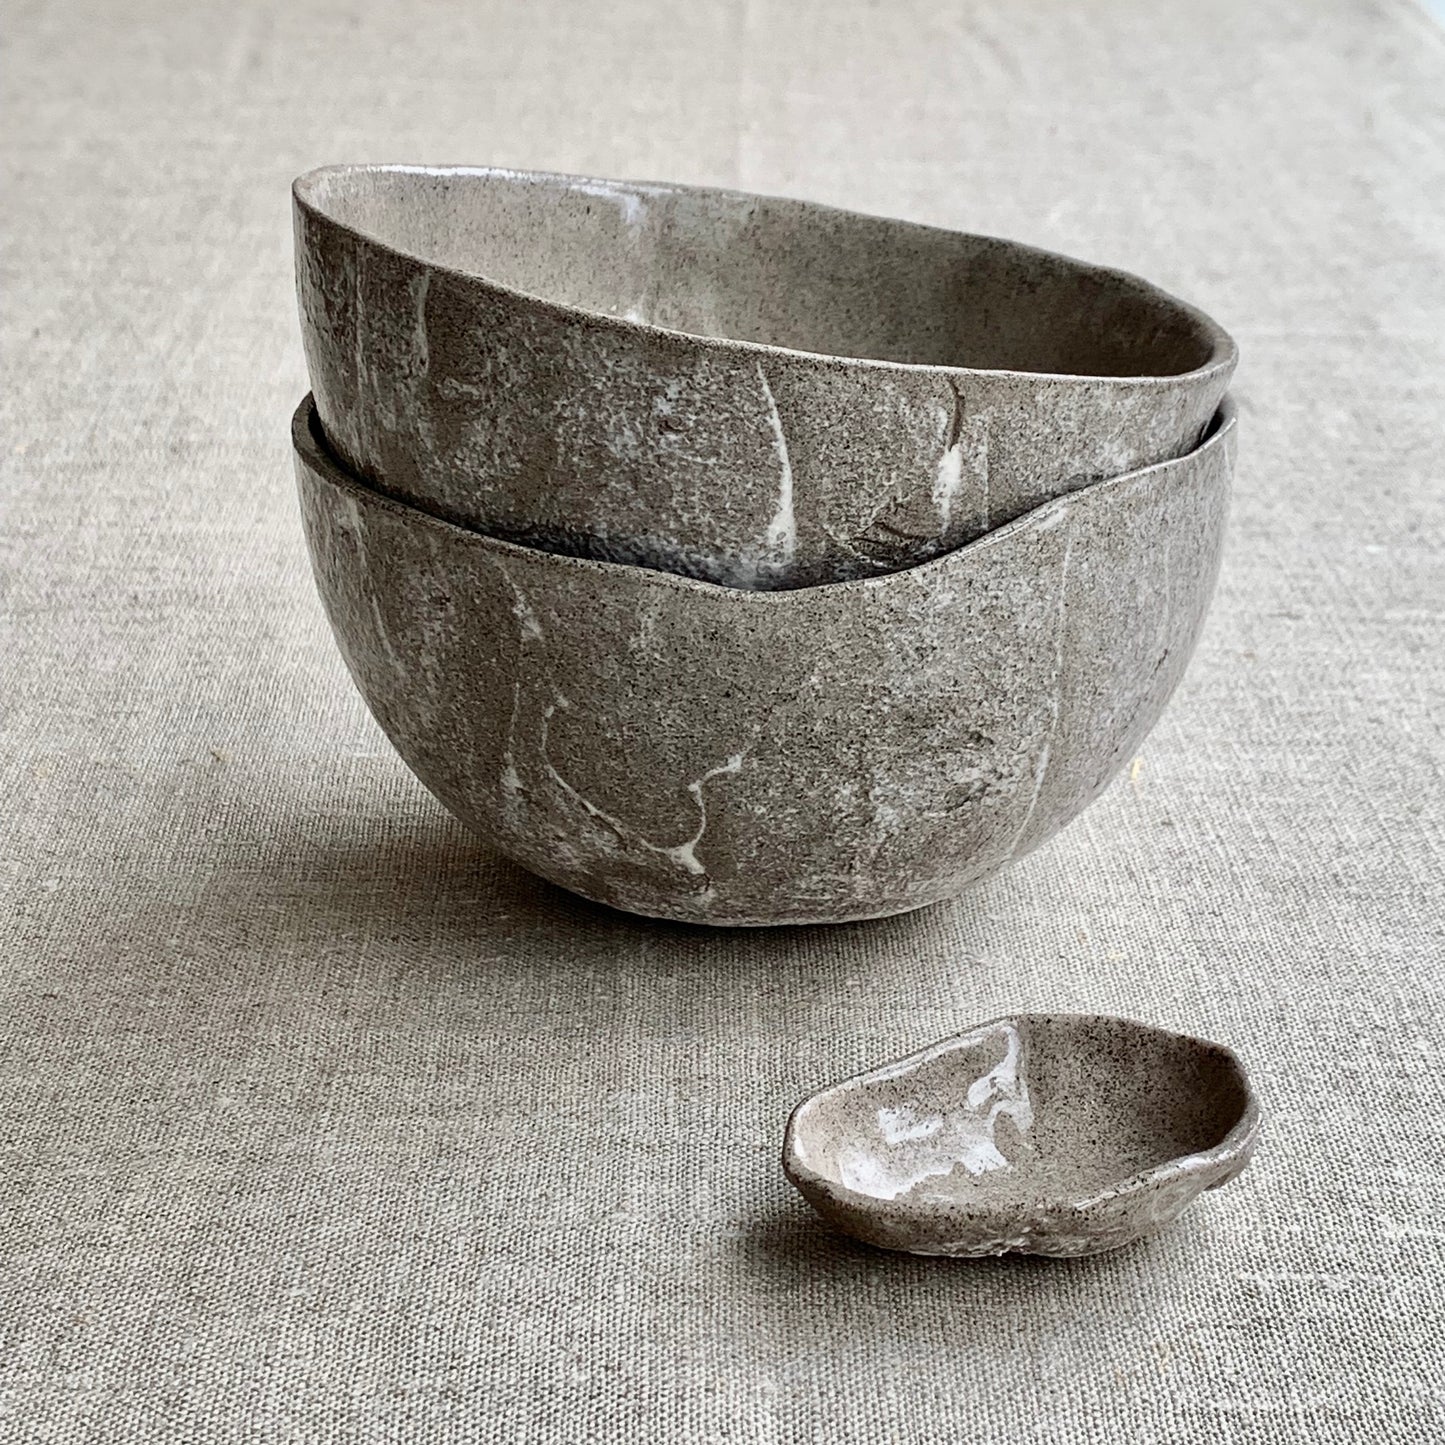 Unique handmade grey ceramic bowl from the Amazon collection. This large bowl made of grey clay enriches your table setting with a deep warm feel or will surprise someone as a personal ceramic gift. A one of a kind signature piece of tableware with a unique design and white porcelain slib